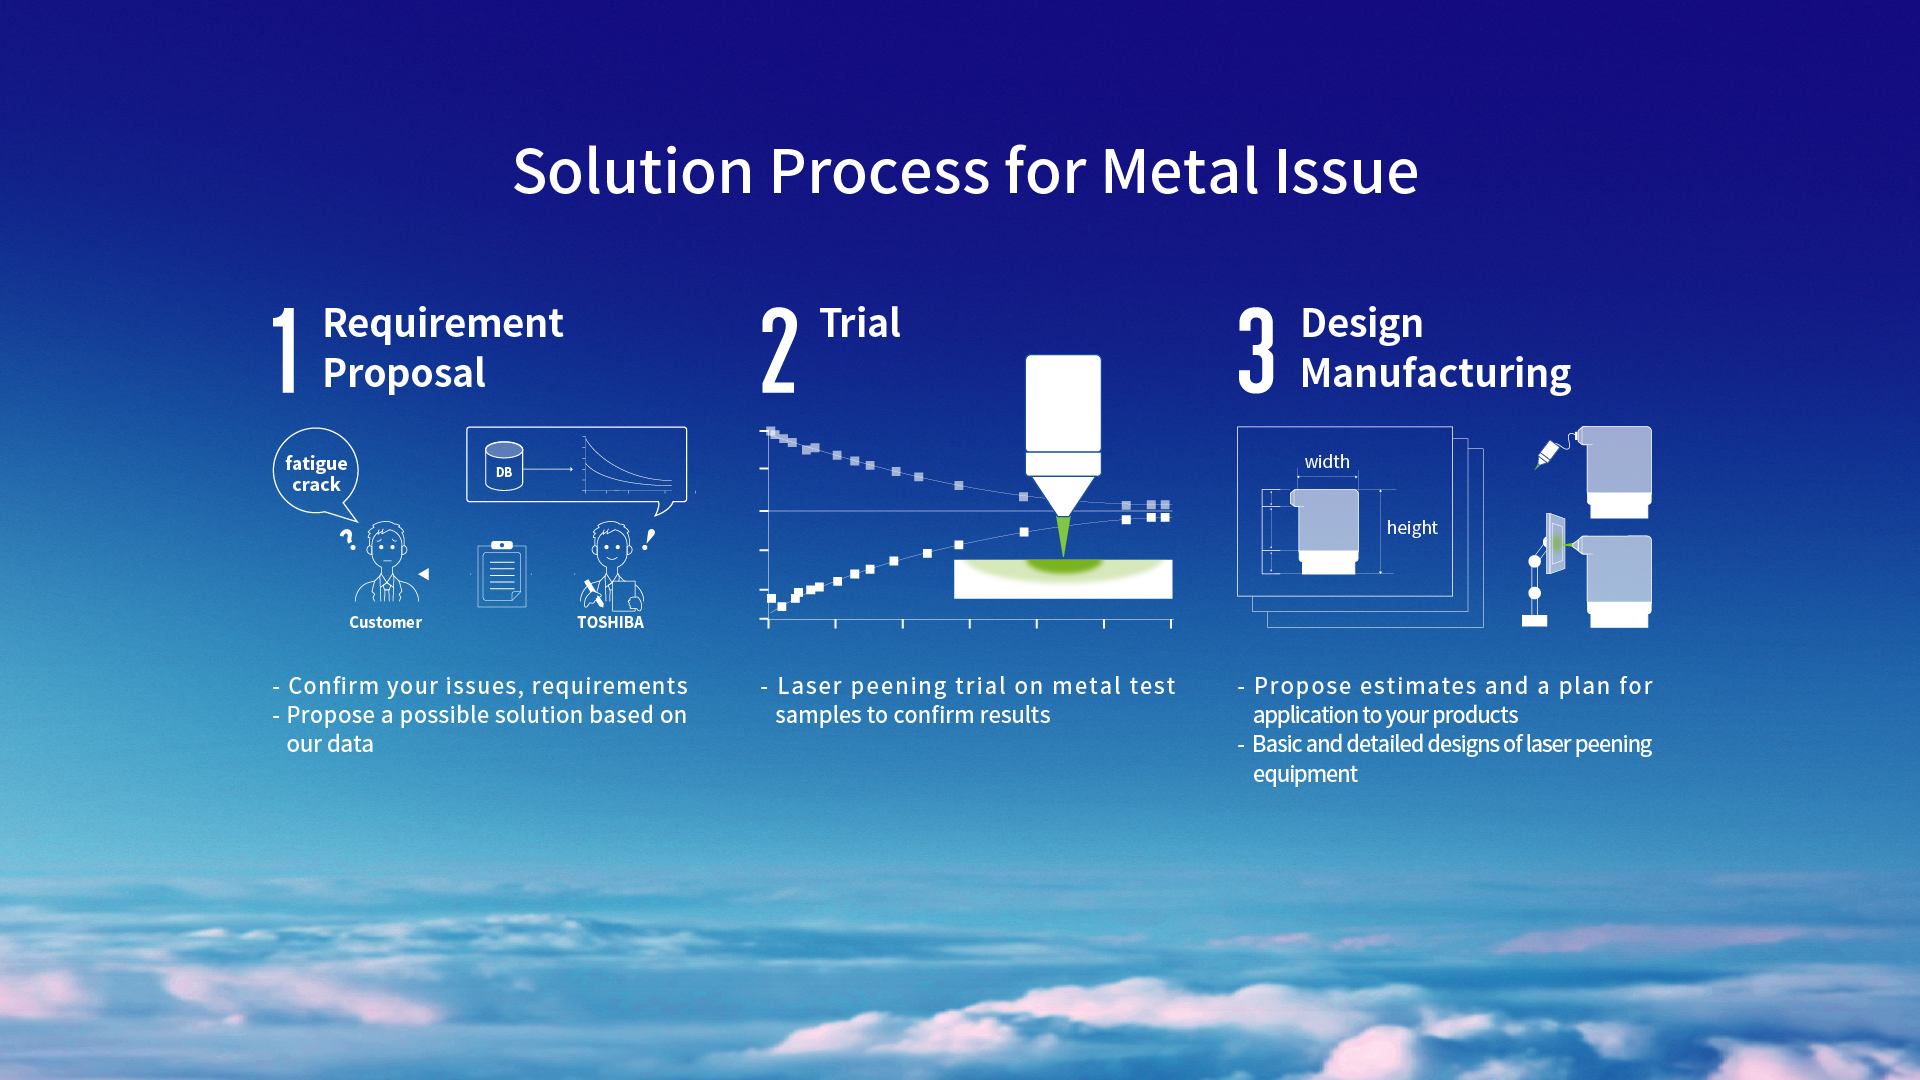 Solution Process for MetalIssue